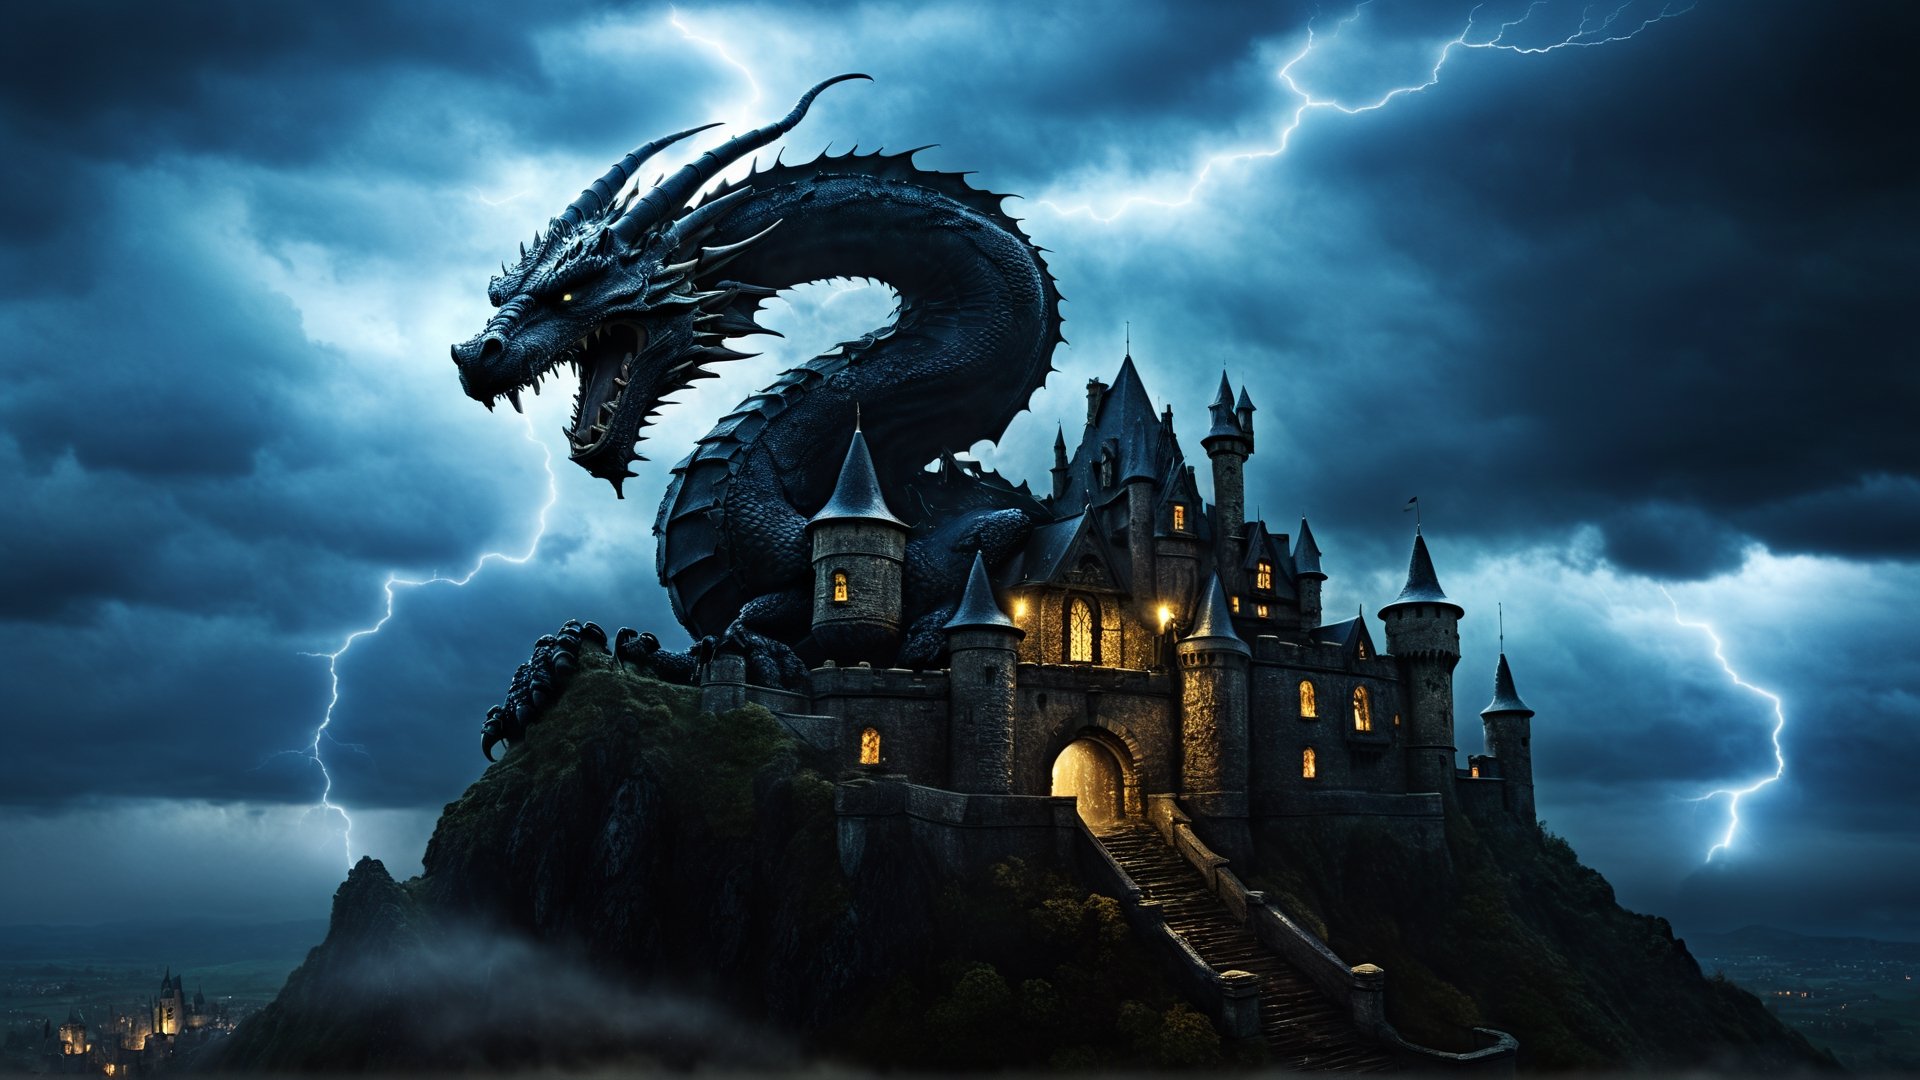 masterpiece, best quality, extremely detailed, 4k, scary setting, fog, haunted, horror, dark scenery, dimly lit, B, Fantasy illustration of a dragon perched on a castle, with a stormy sky and lightning in the background, fantasy horror art, photorealistic dark concept art, in style of dark fantasy art,  detailed 4k horror artwork, stefan koidl inspired, ((stefan koidl)), detailmaster2, DonMn1ghtm4reXL, Movie Still